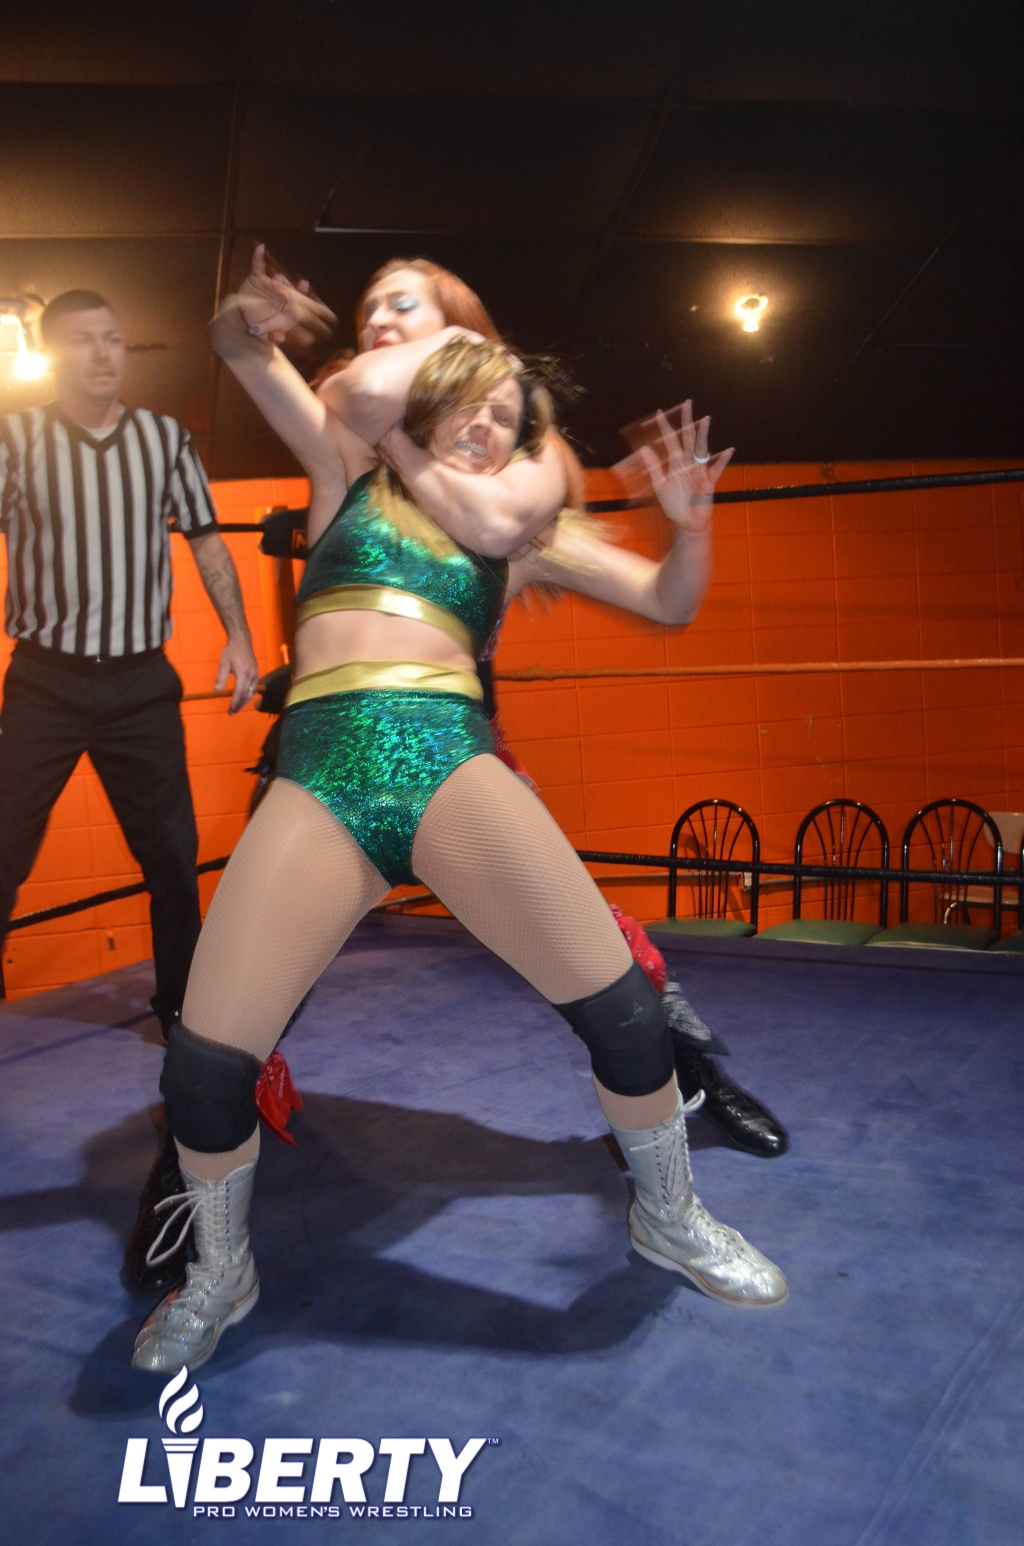 abo yosuf recommends female wrestling sleeper holds pic